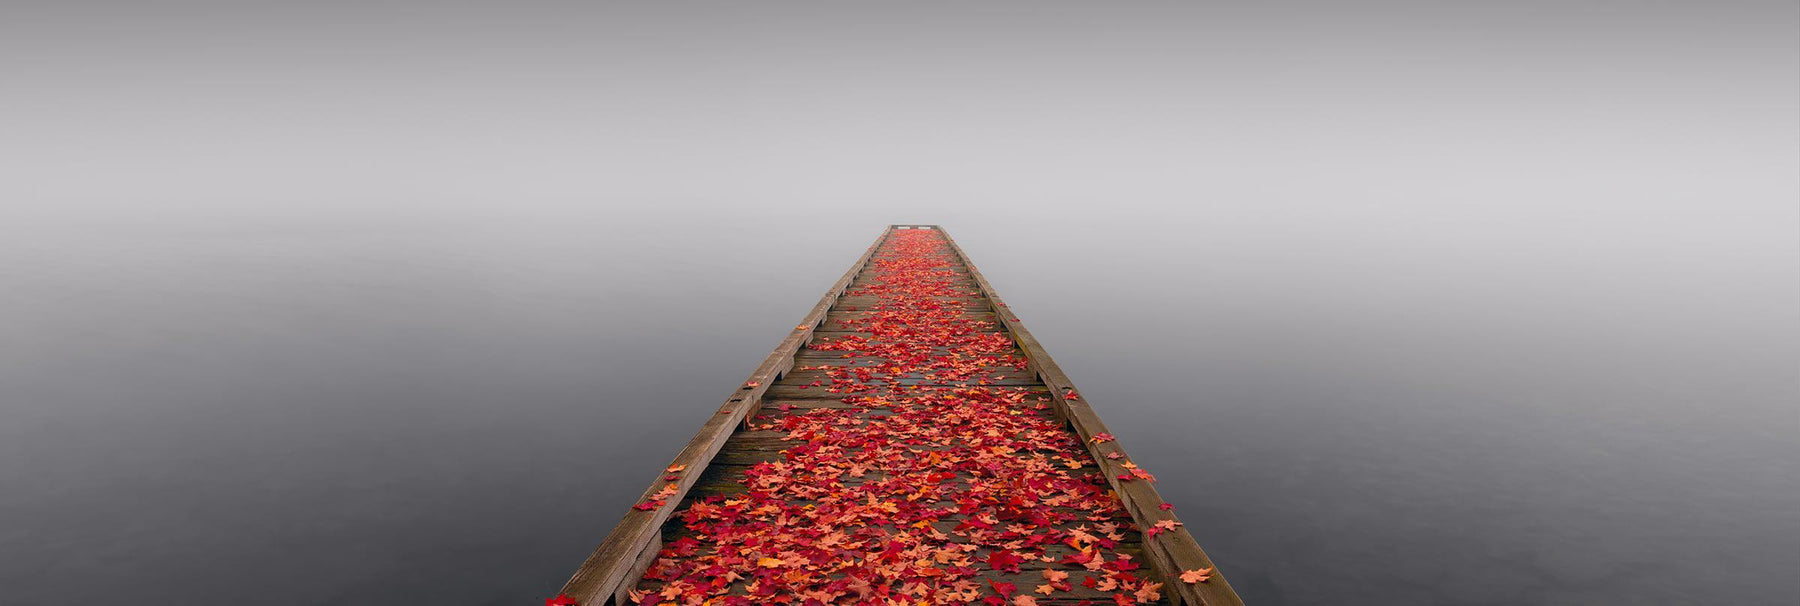 Wooden jetty covered with Autumn leaves reaching out over a misty lake in Seattle Washington